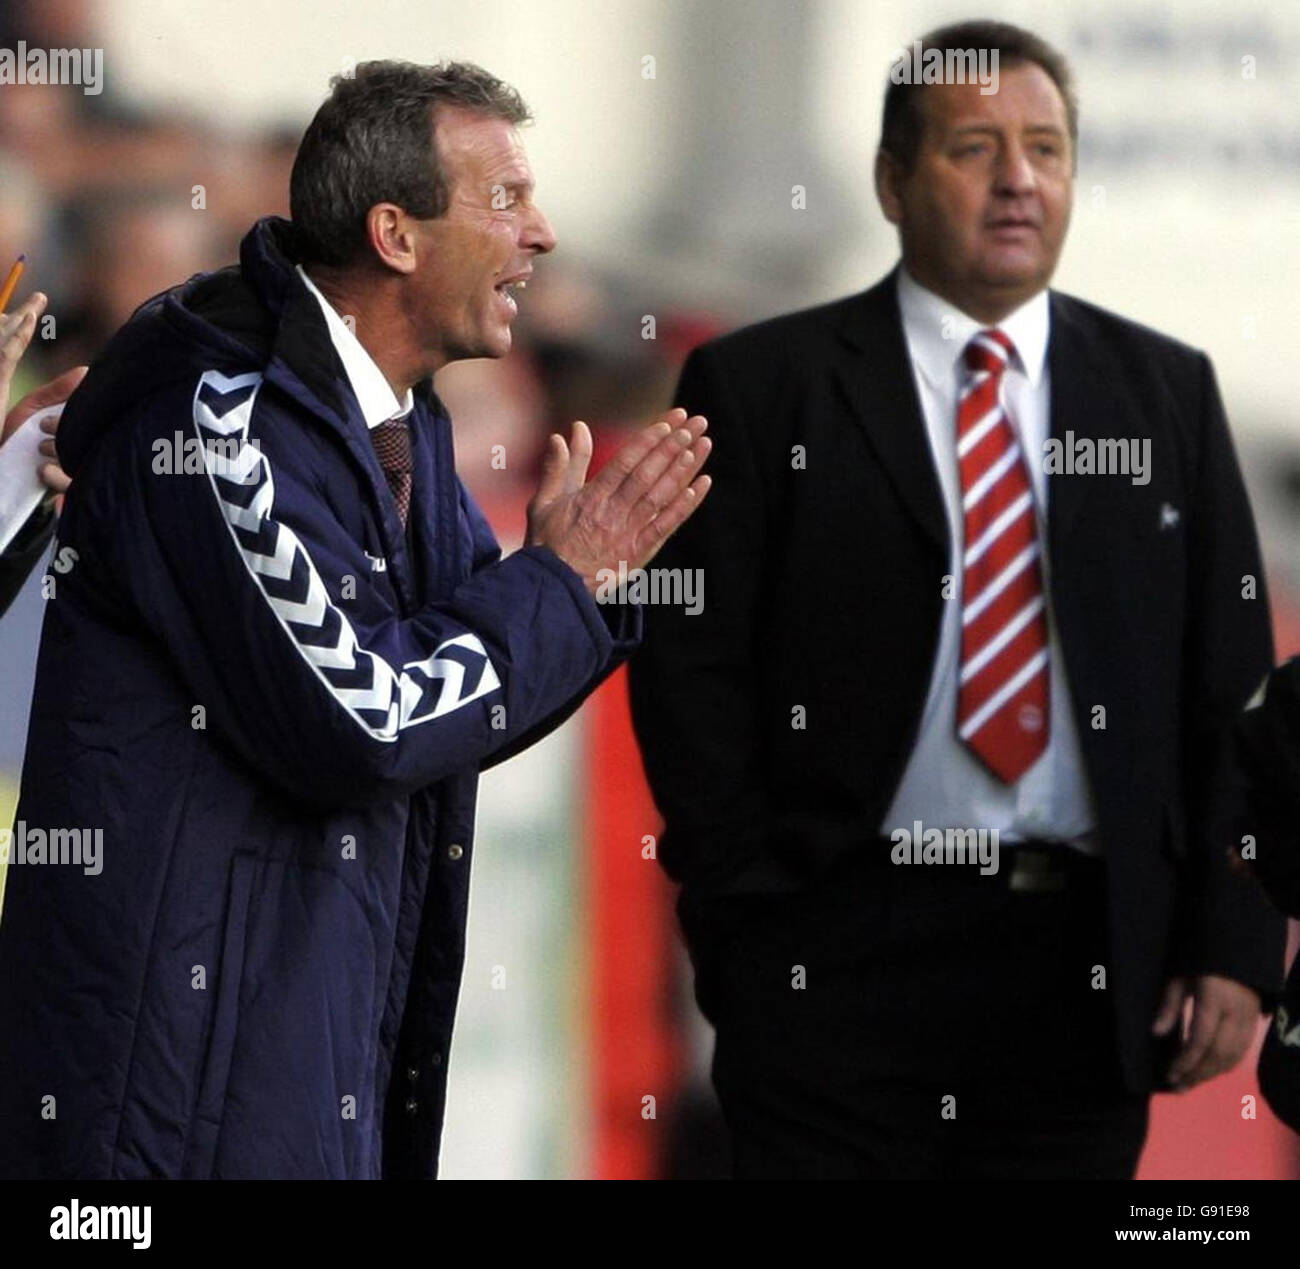 Hearts new manager Graham Rix (L) cheers his team as Aberdeen manager Jimmy Calderwood looks on during the Bank of Scotland Premier League match at Pittodrie Stadium, Aberdeen, Sunday November 20, 2005. PRESS ASSOCIATION Photo. Photo credit should read: Andrew Milligan/PA. **EDITORIAL USE ONLY** Stock Photo